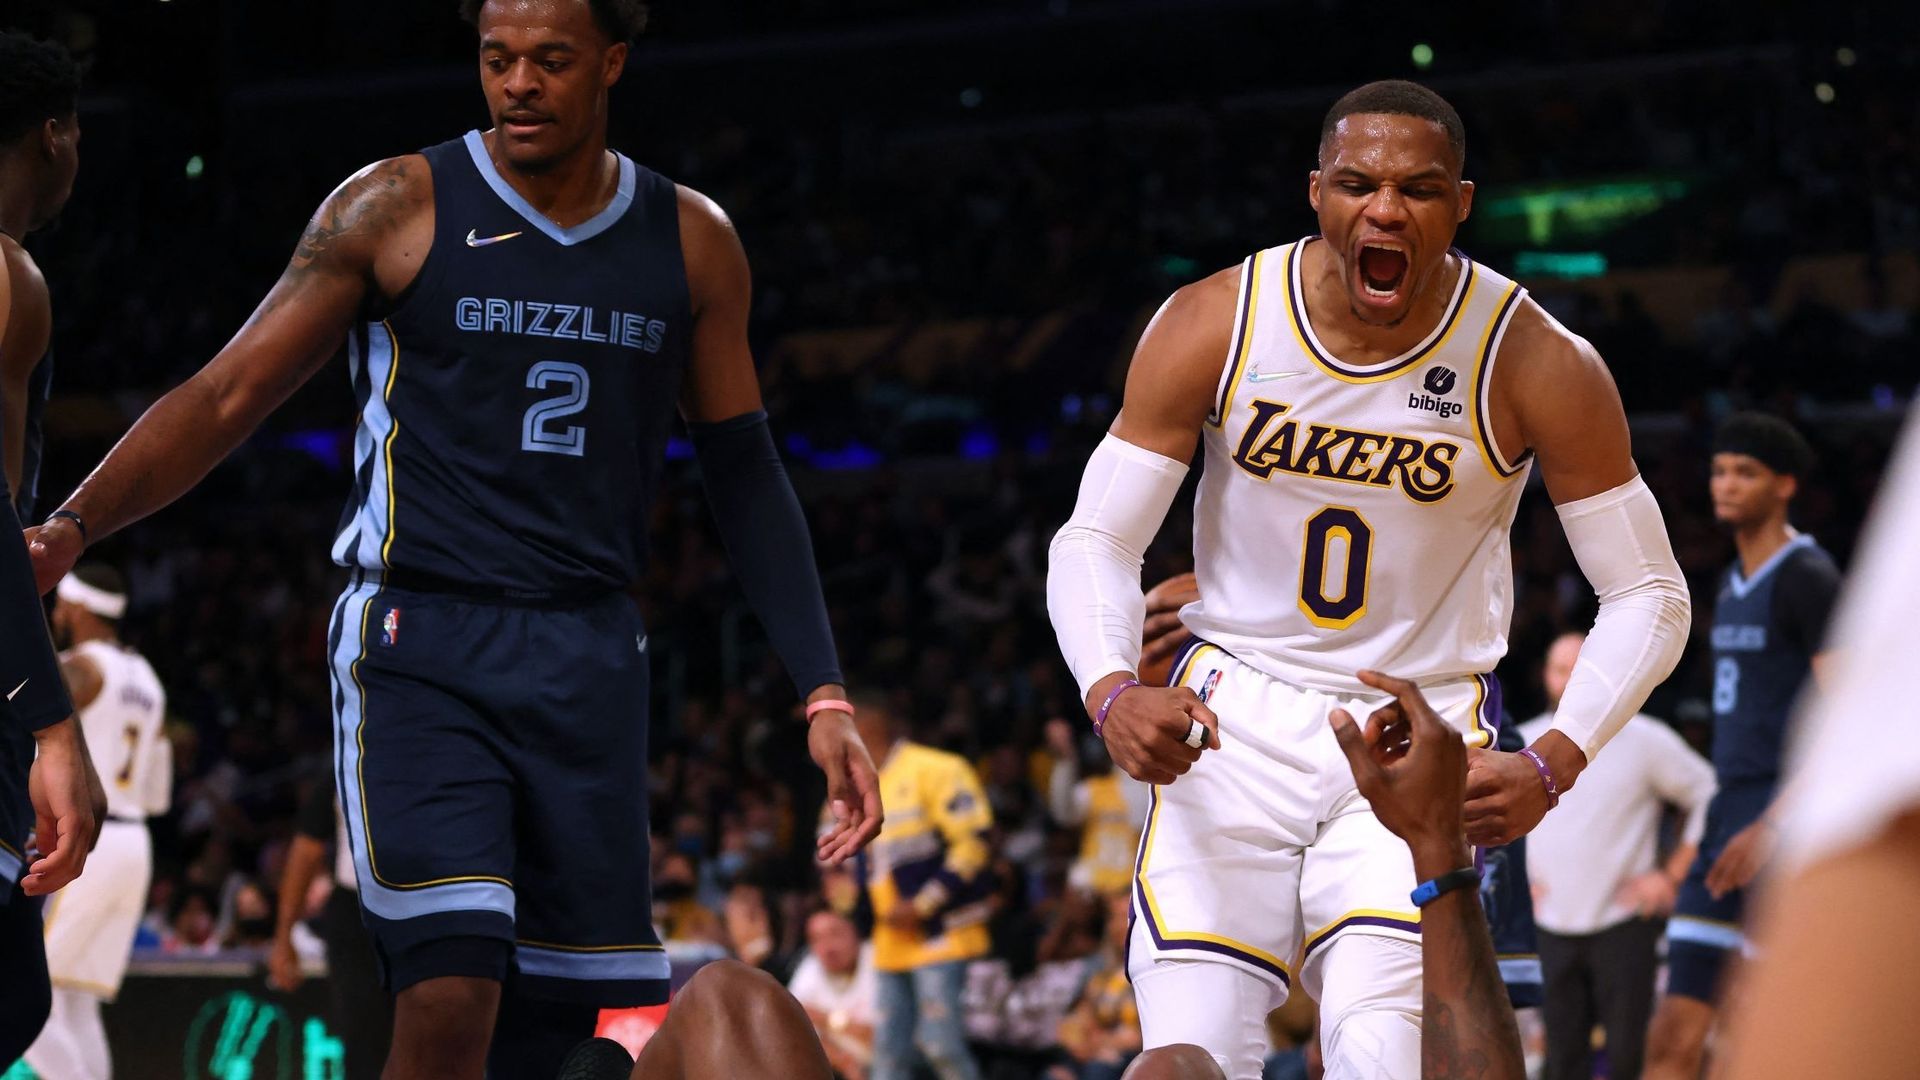 NBA : Les Lakers gagnent enfin, Golden State et Charlotte toujours invaincus